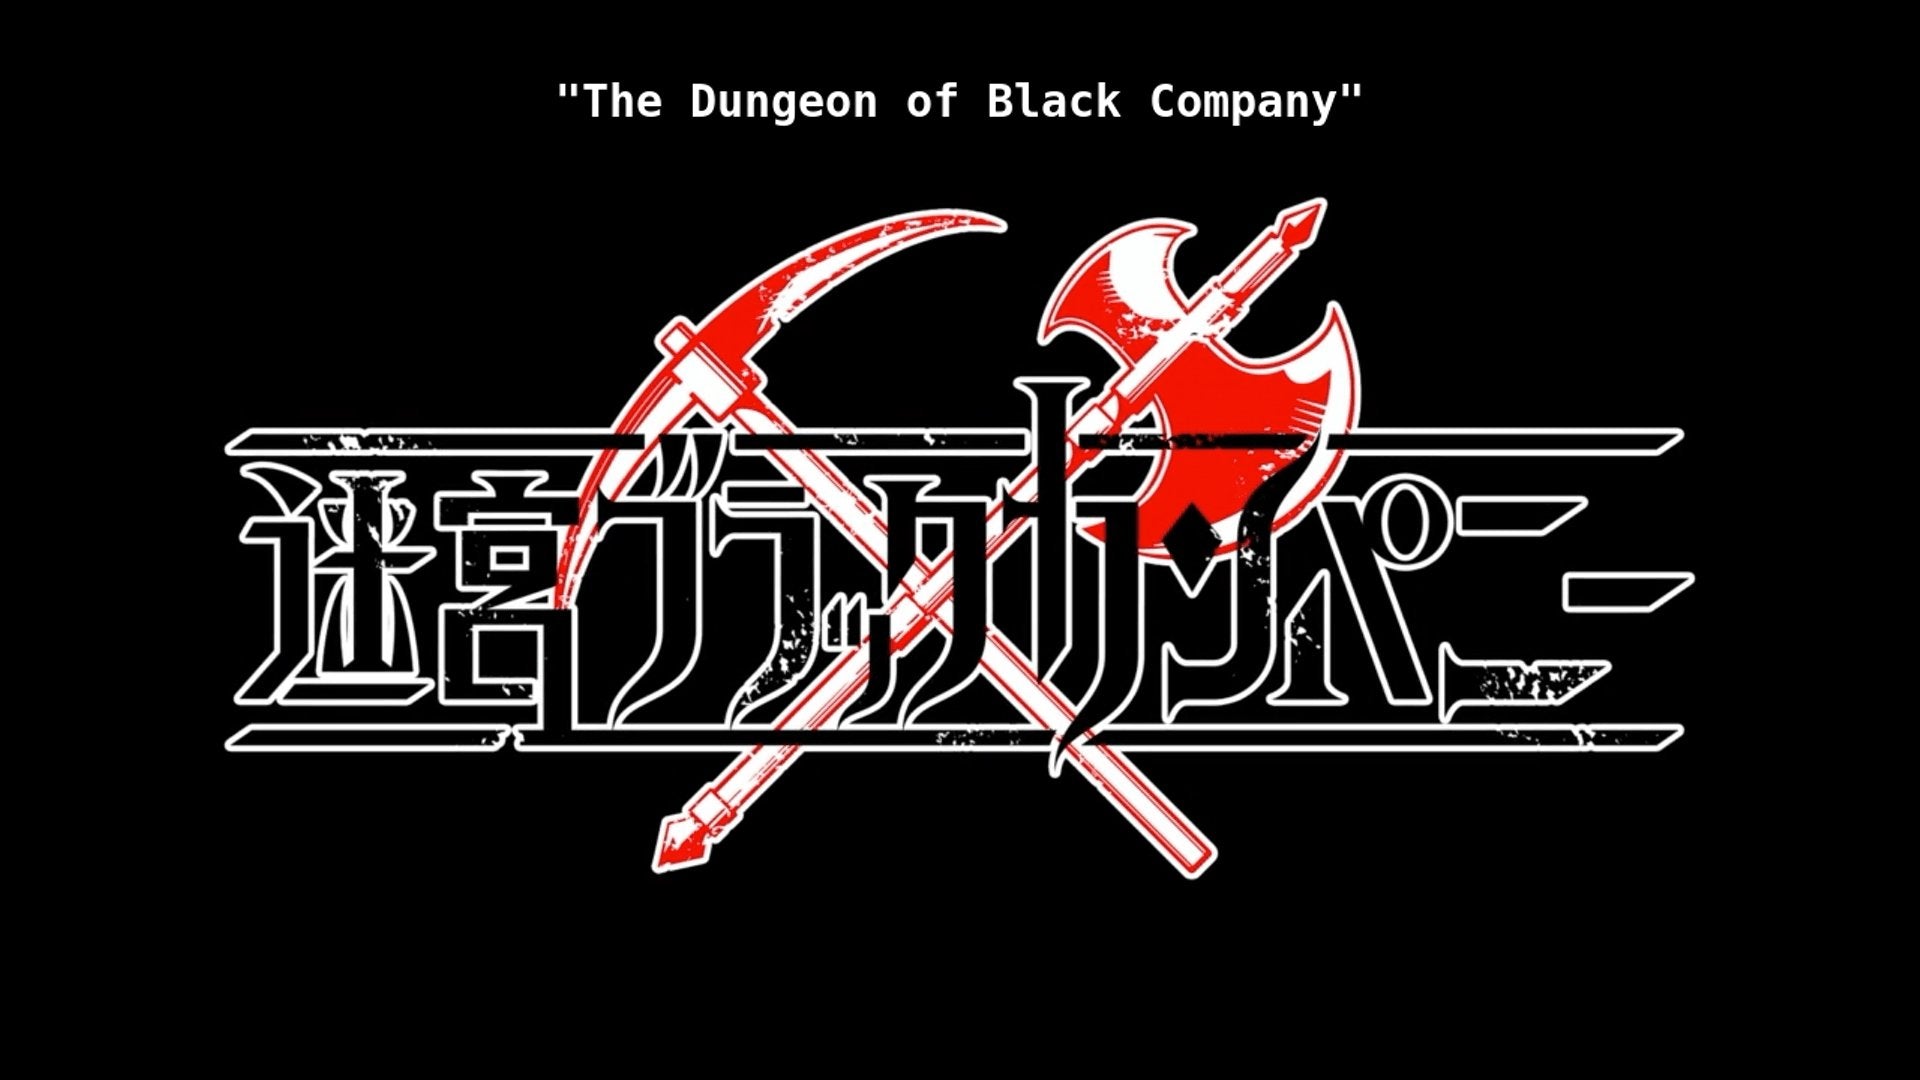 The Dungeon of Black Company Season 2 will release sometime in